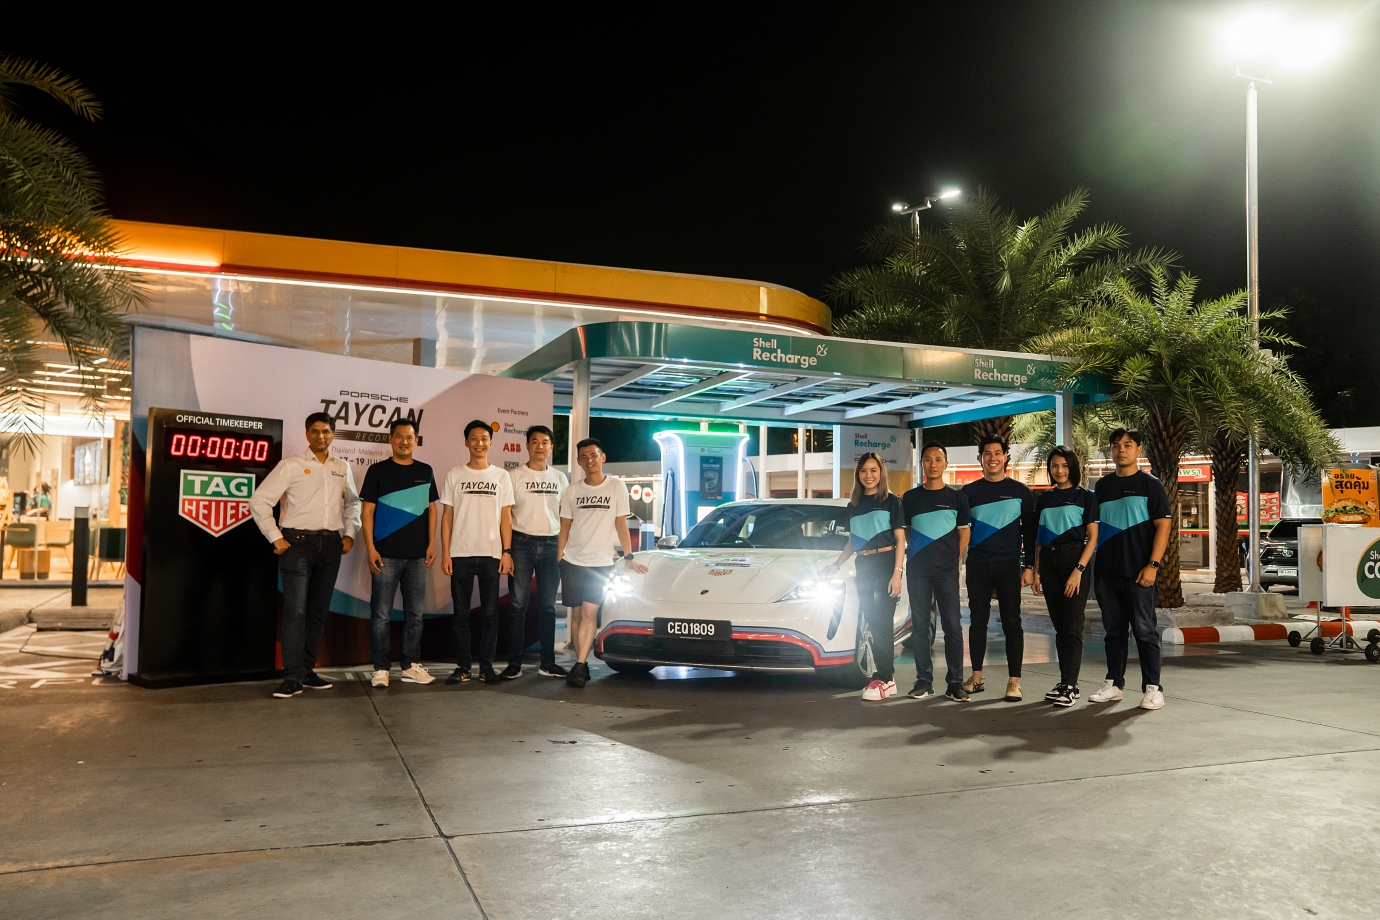 porsche taycan, taycan 4s, porsche singapore, tag heuer, andre brand, shell recharge, porsche moments, sportscar together, porsche taycan, taycan, ev, electric vehicles, porsche taycan 4s, porsche taycan 4s cross turismo makes ev record run from thailand to singapore in 29 hours 15 minutes